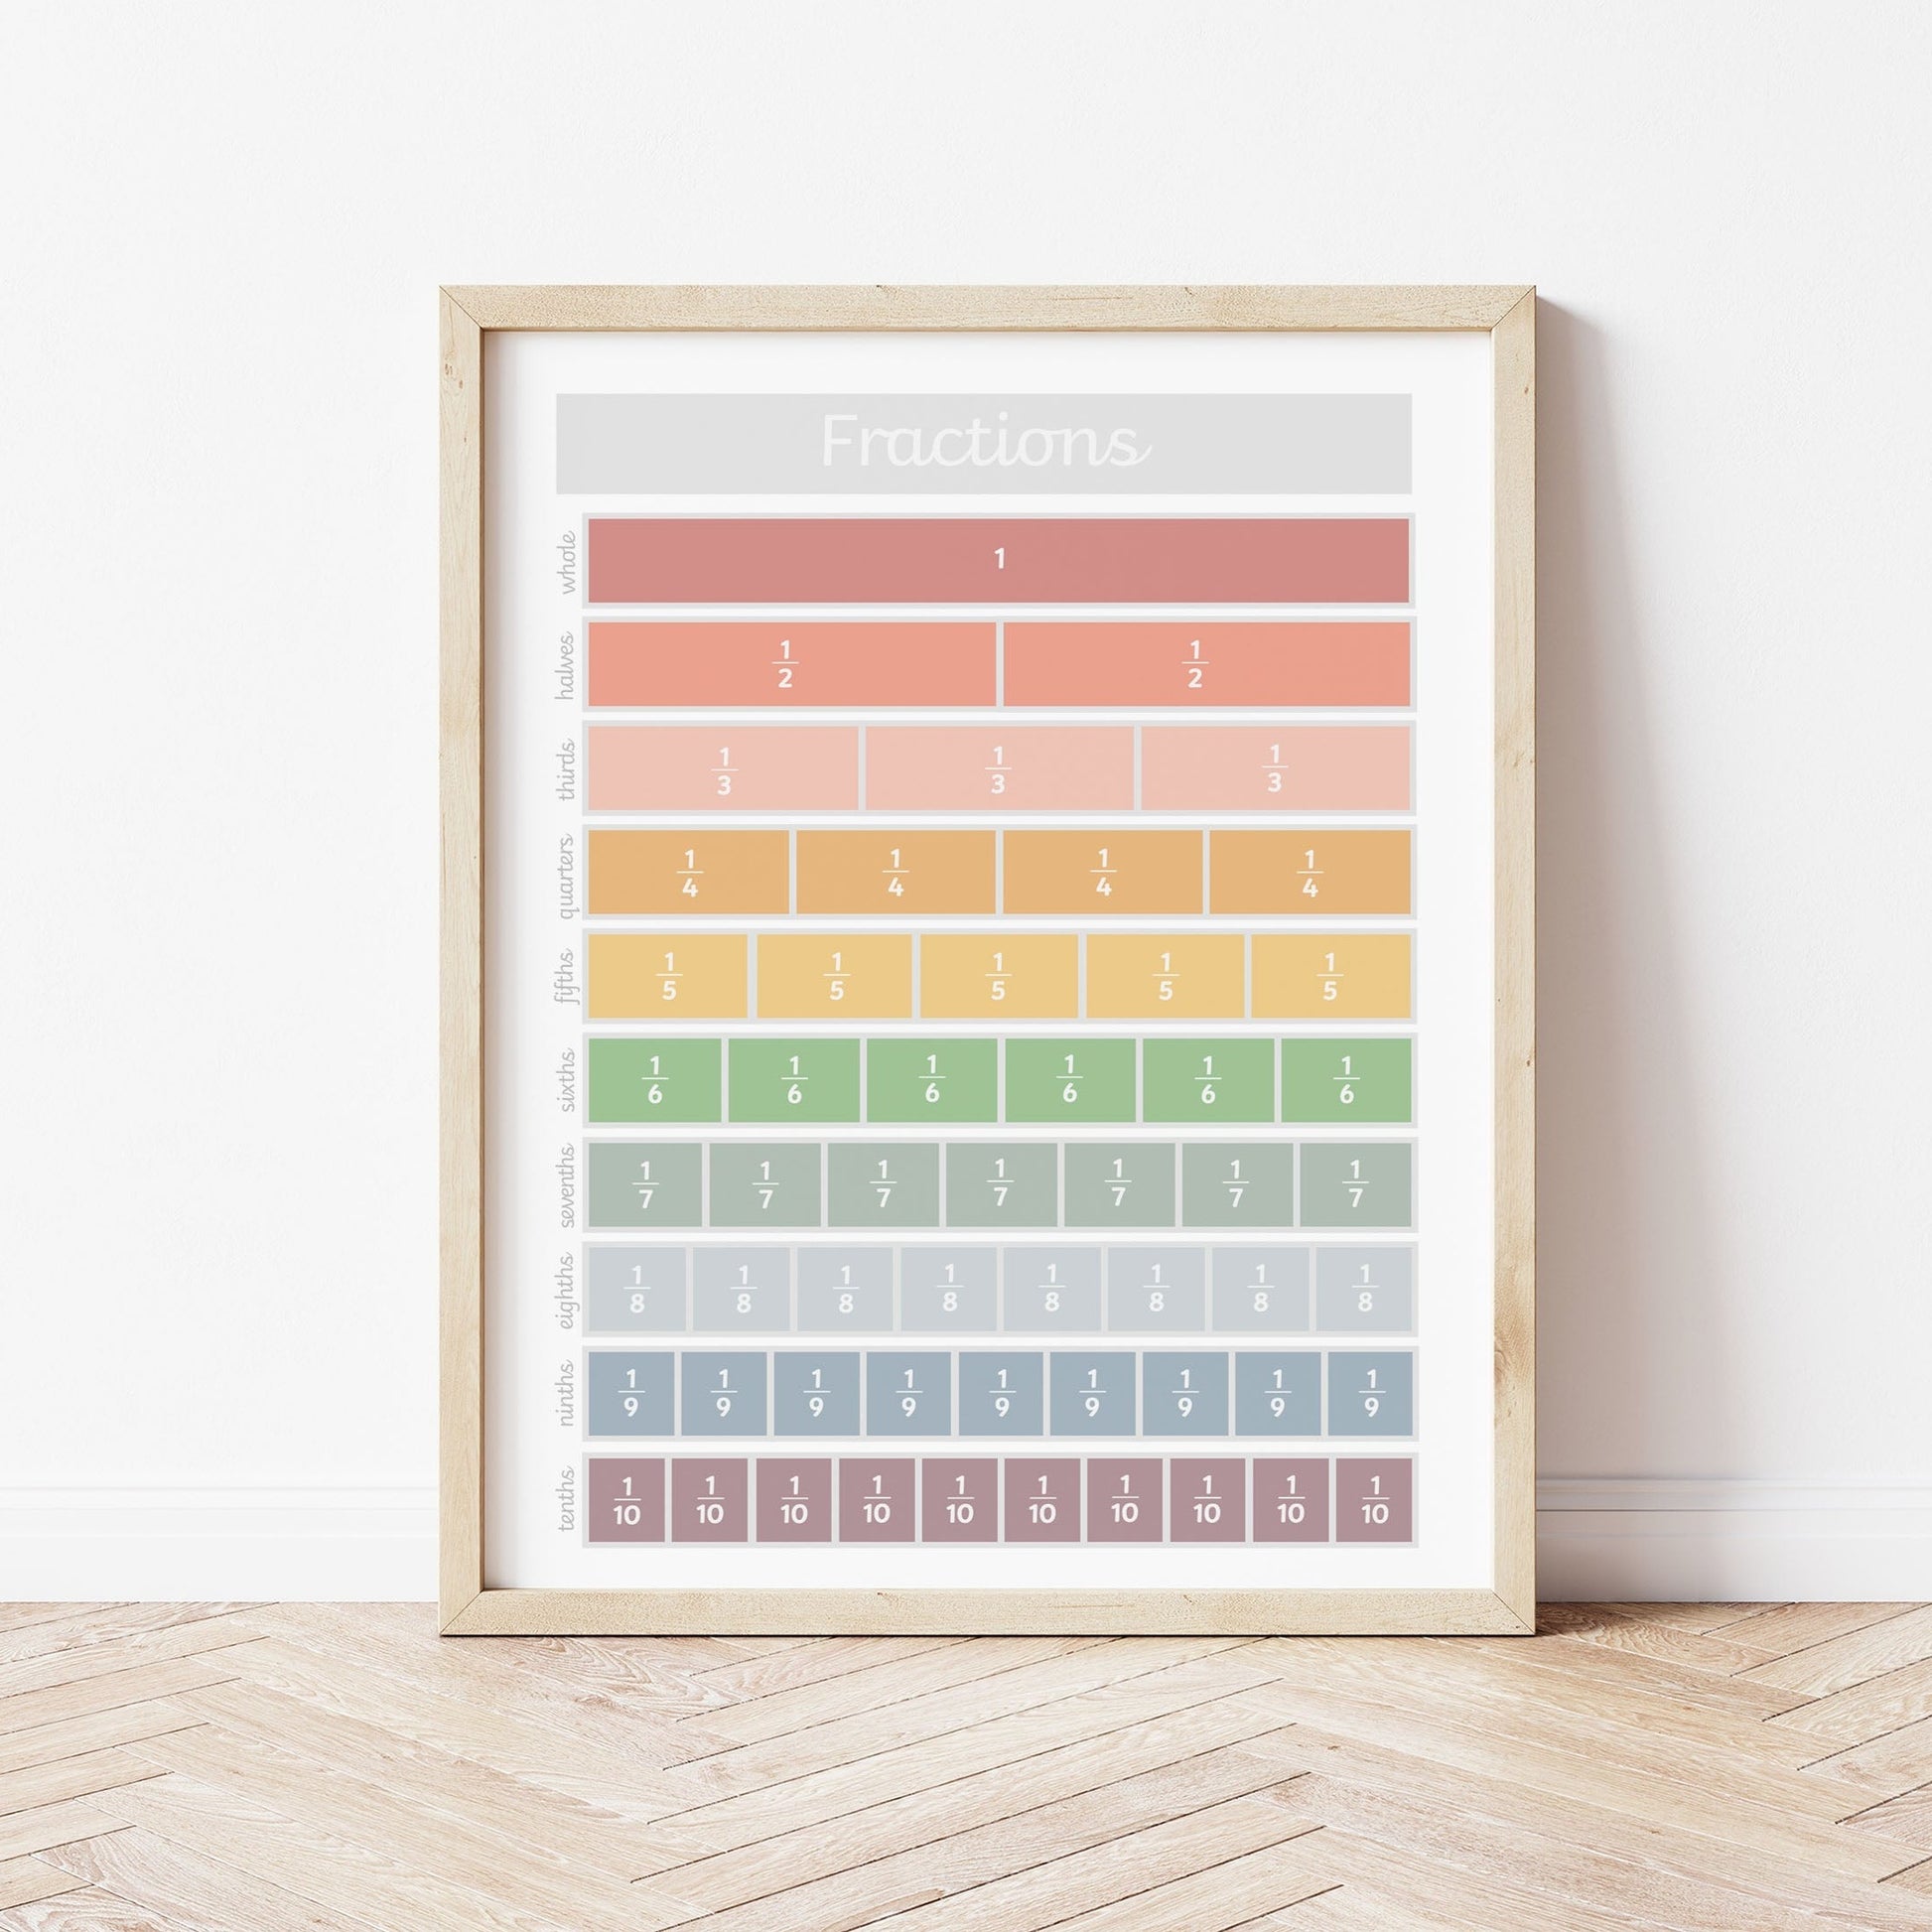 Fractions Art Print by The Little Jones (15 Sizes Available)